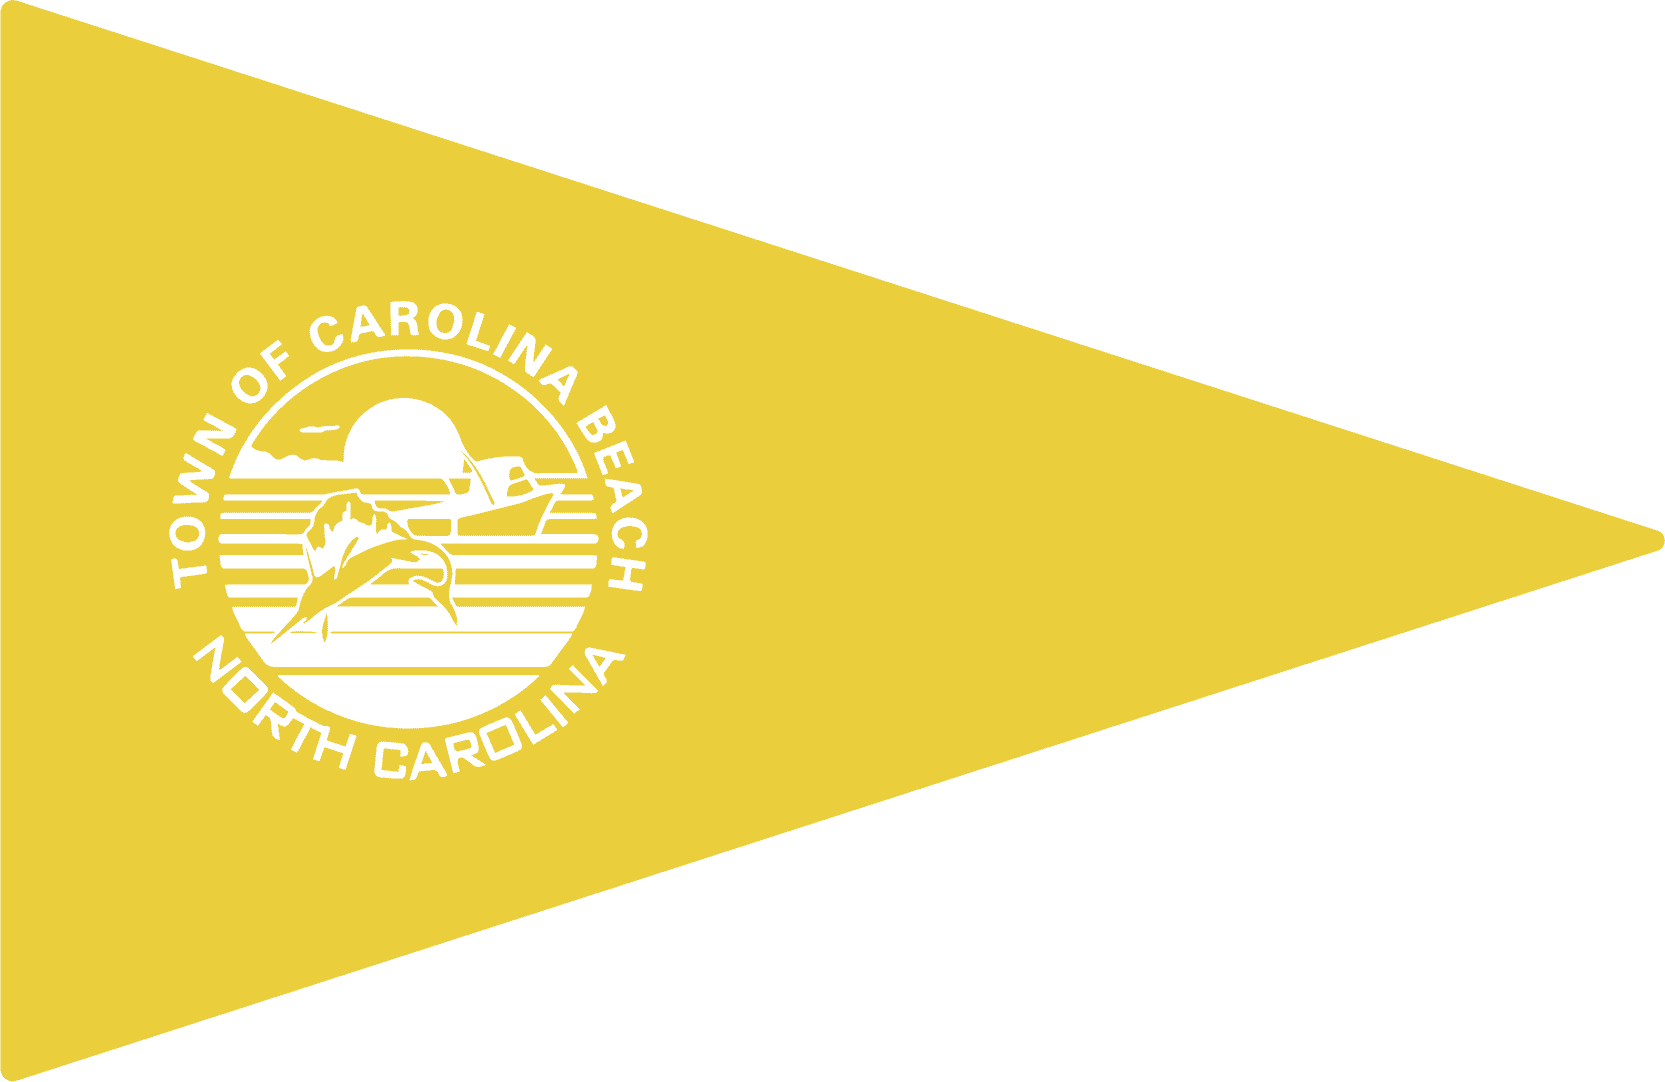 Today's Flag Color in Carolina Beach is a Yellow Flag